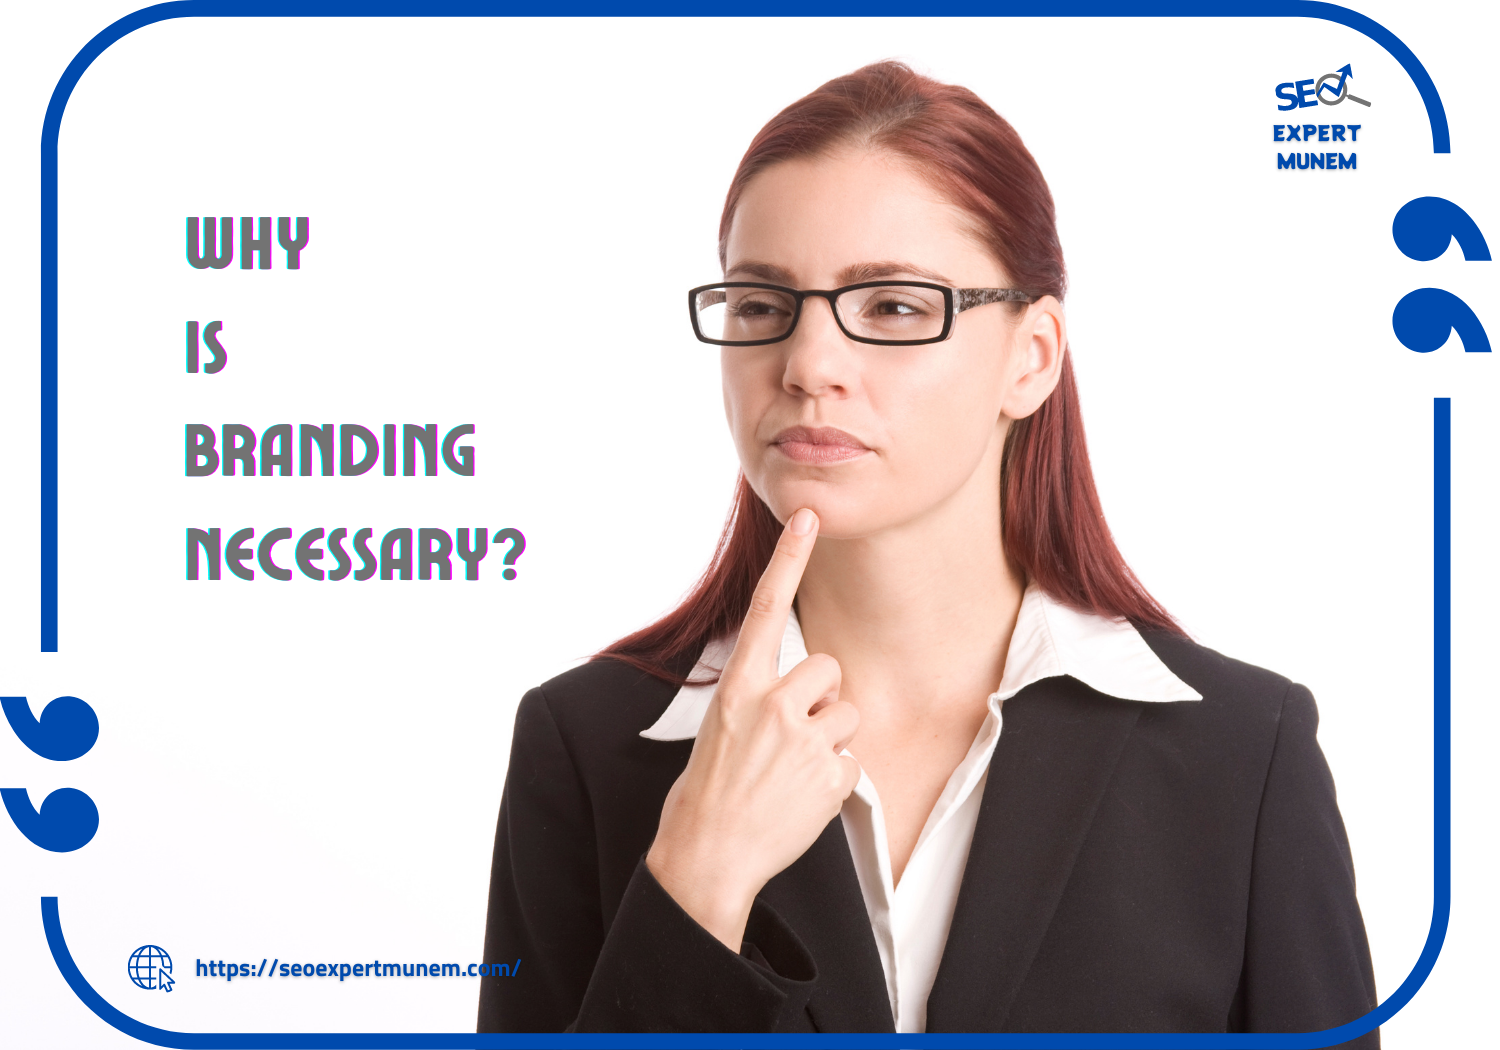 Why is branding necessary?